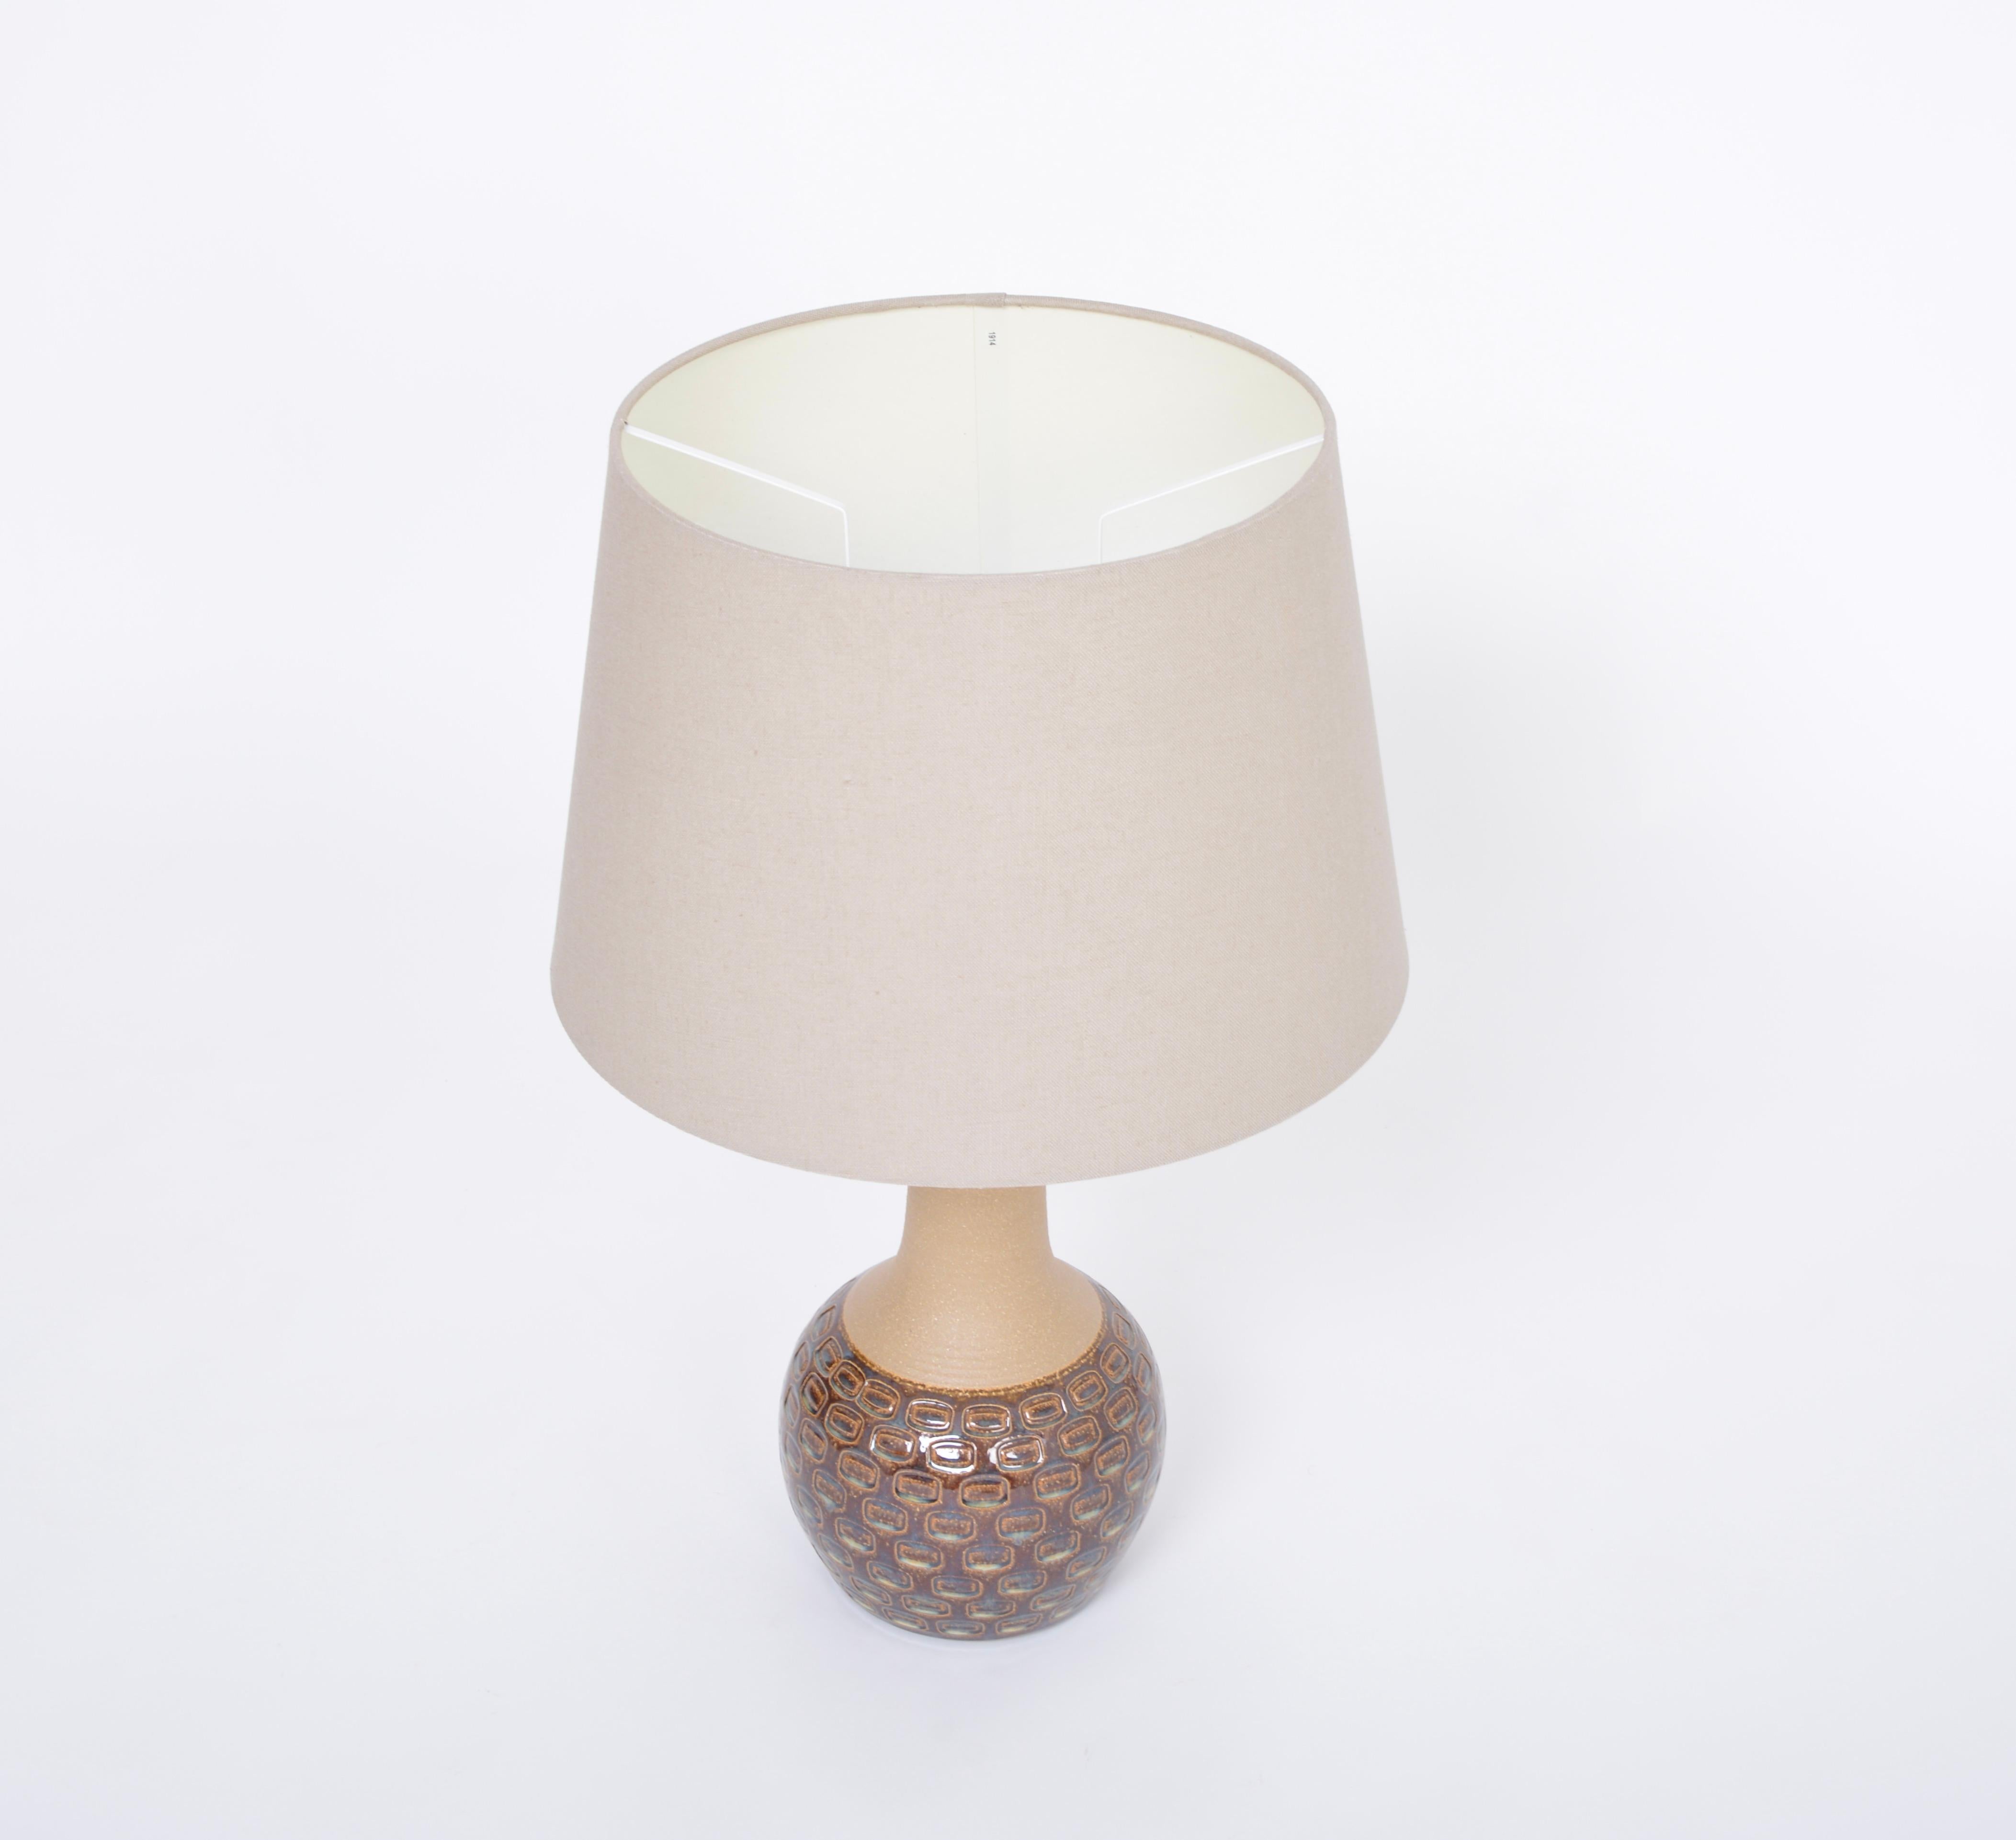 Handmade Danish Mid-Century Modern Stoneware Lamp with Graphic Pattern by Soholm In Good Condition For Sale In Berlin, DE